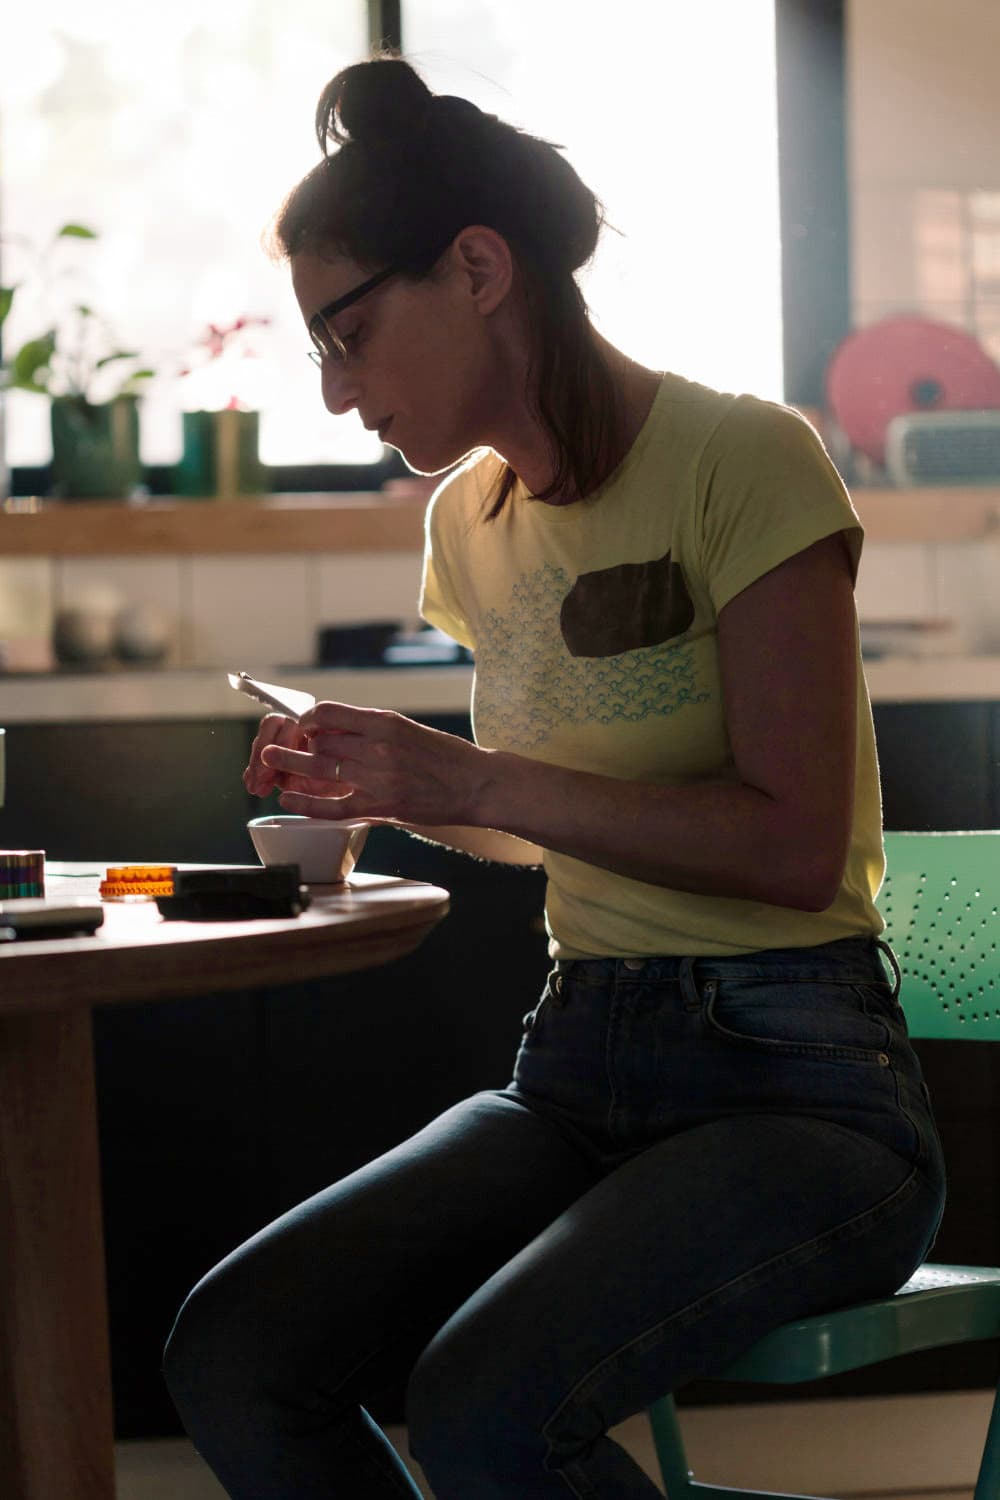 Adult woman sitting at her dining table at home, making a cannabis cigarette.